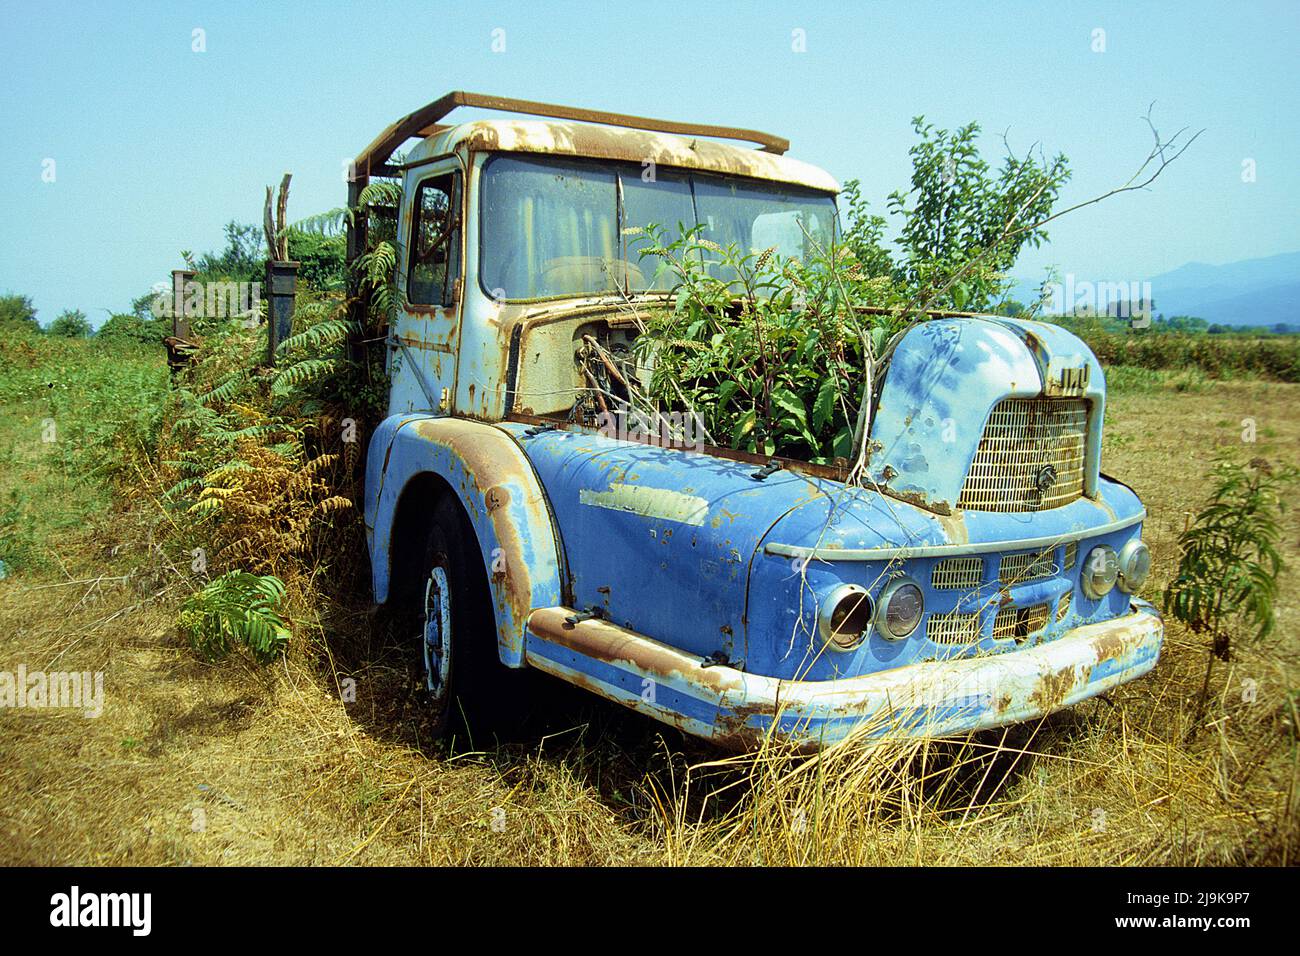 Abandoned truck, overgrown with plants, Corsica, France, Mediterranean, Europe Stock Photo